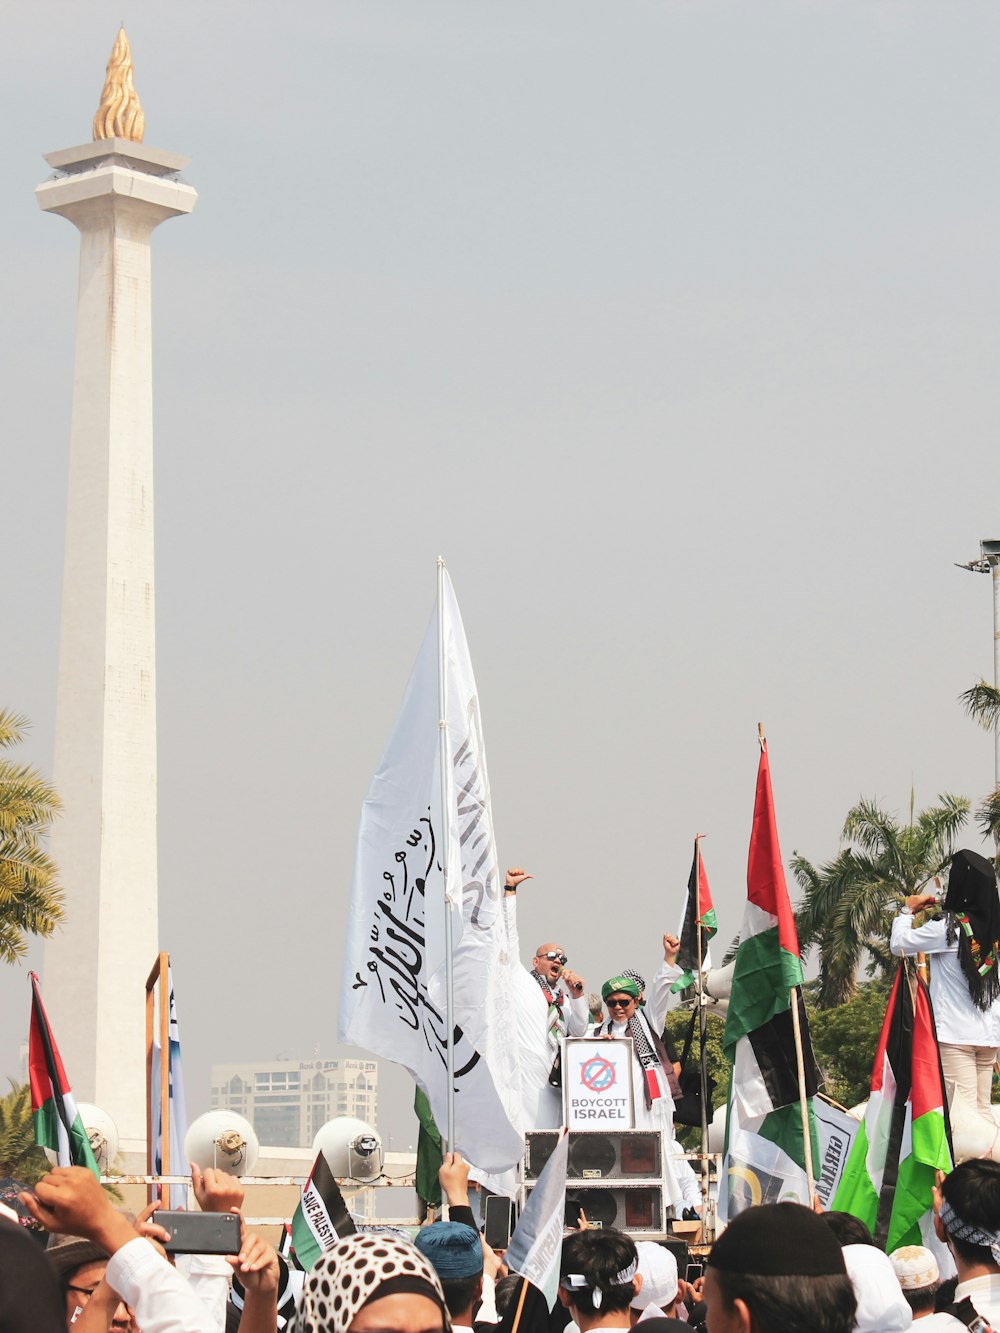 a large group of people holding flags in front of a monument